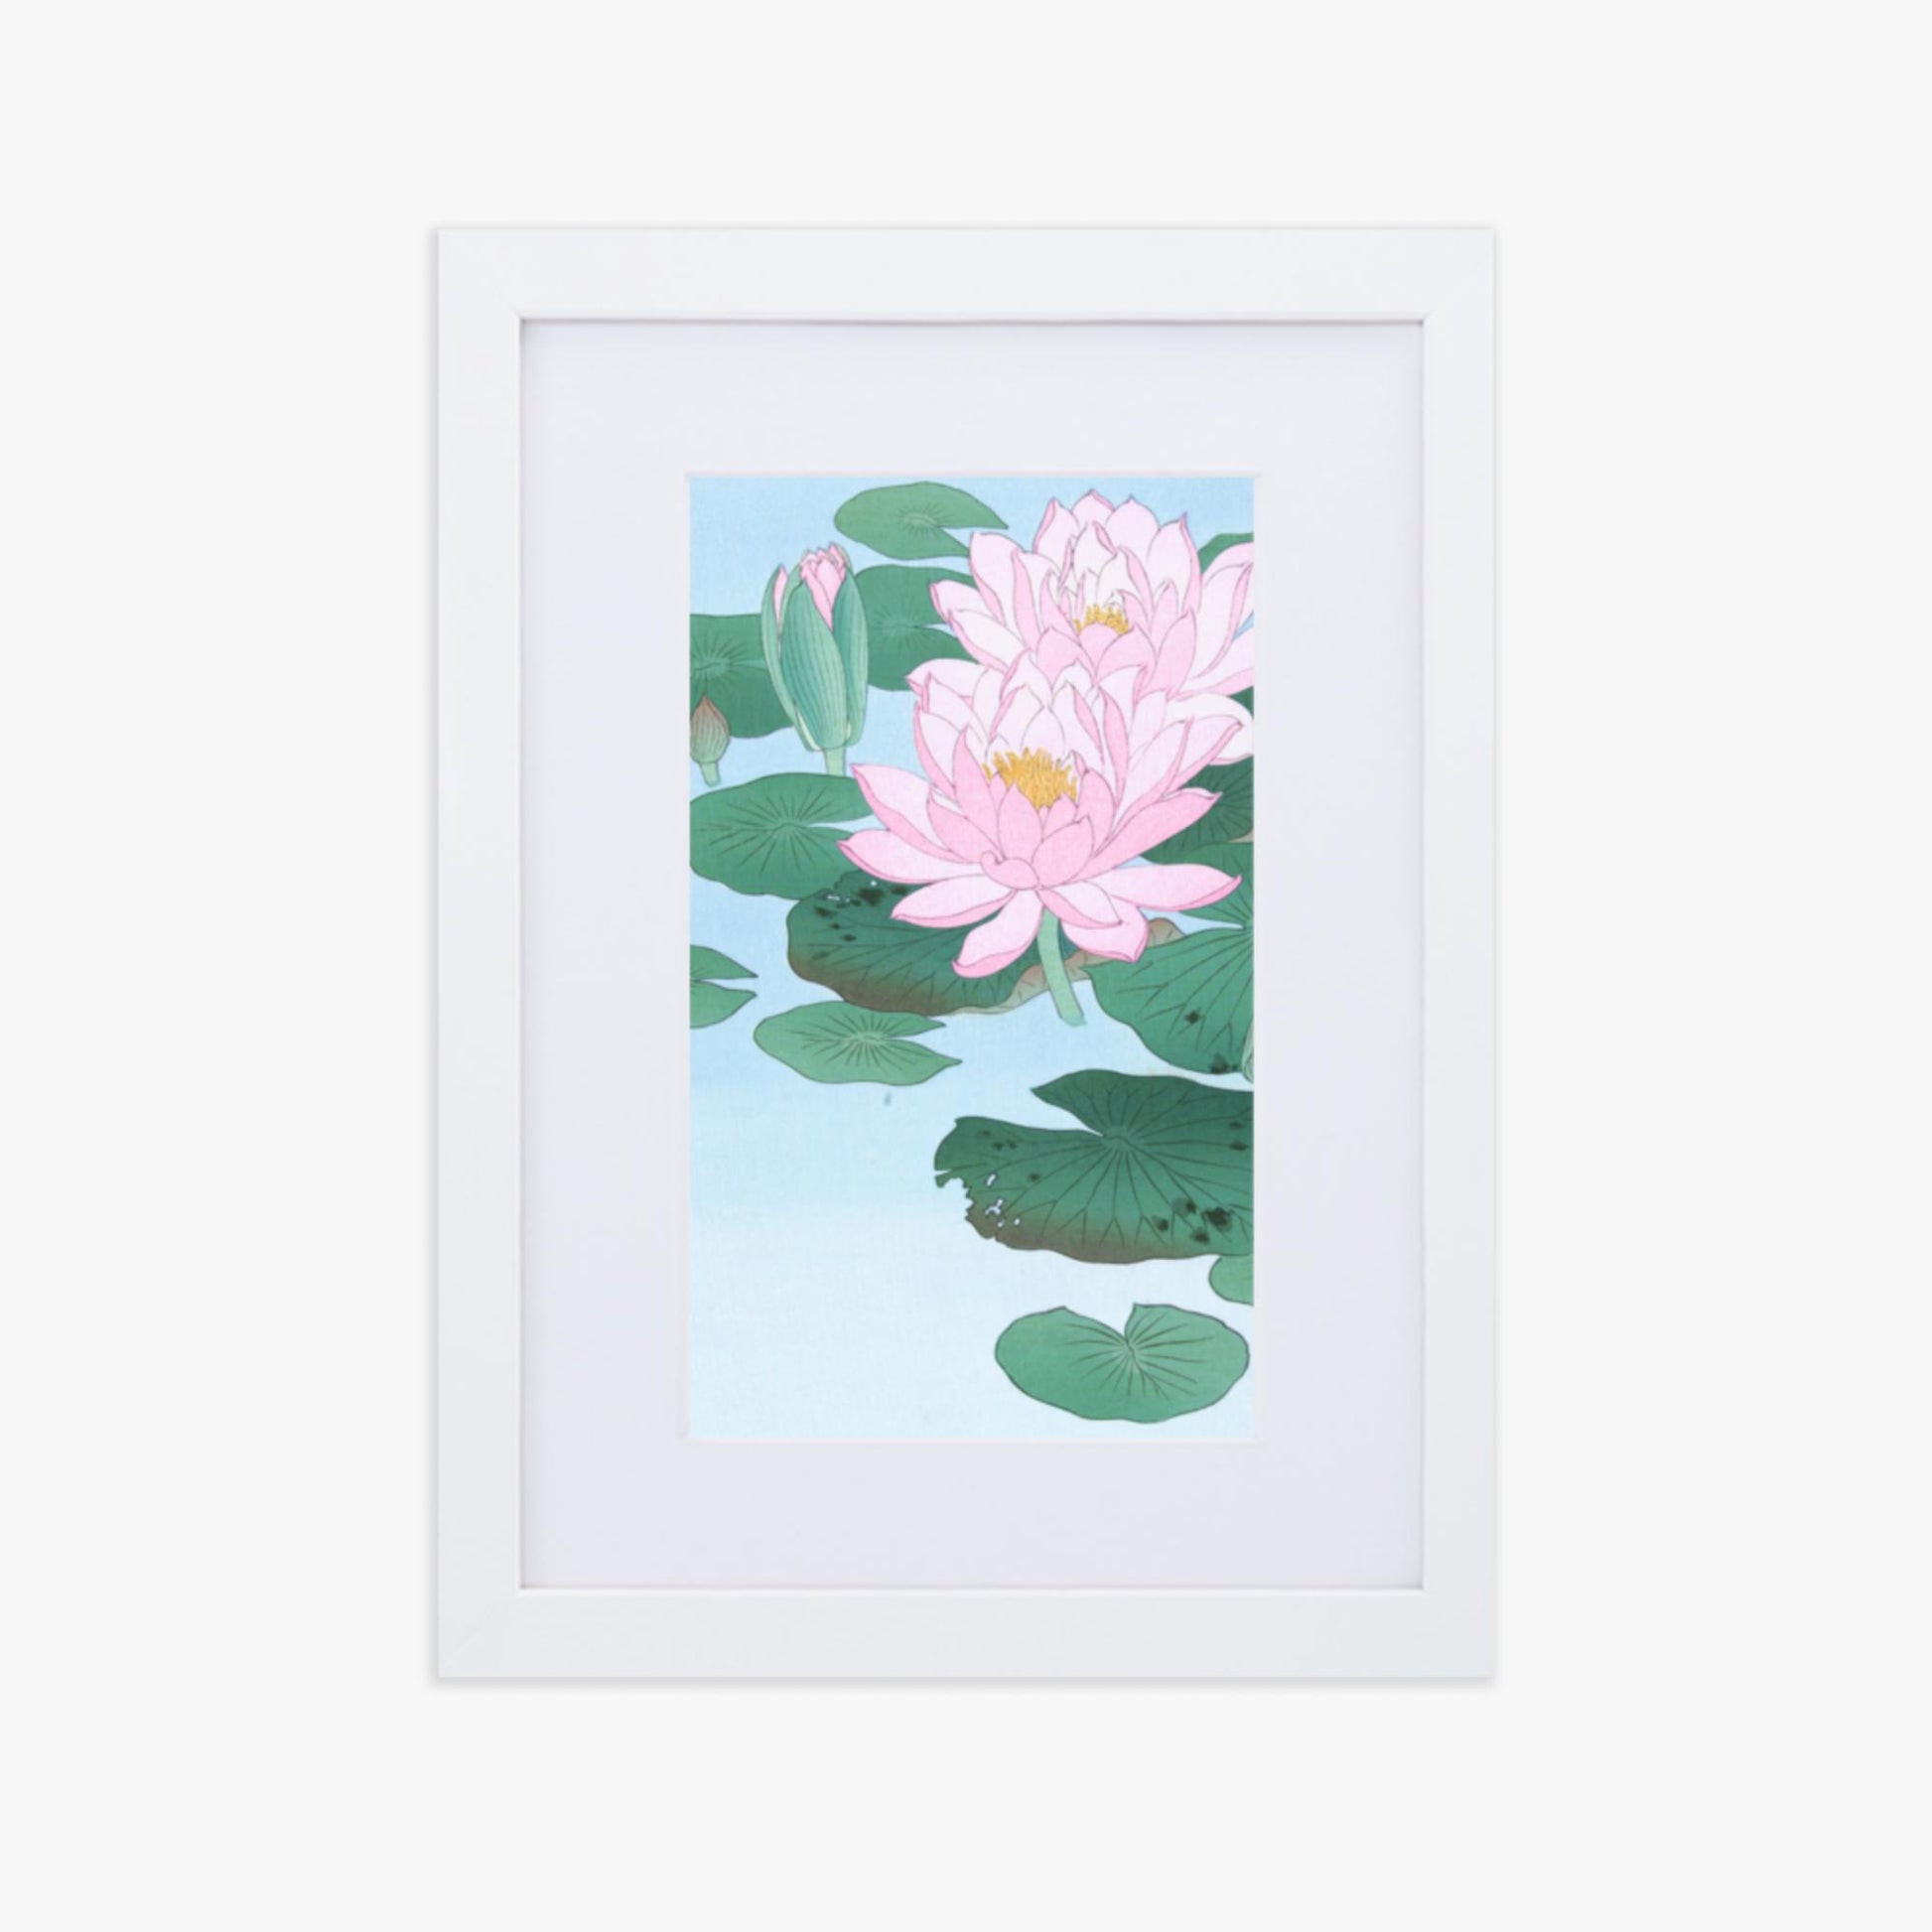 Ohara Koson - Water Lily 21x30 cm Poster With White Frame